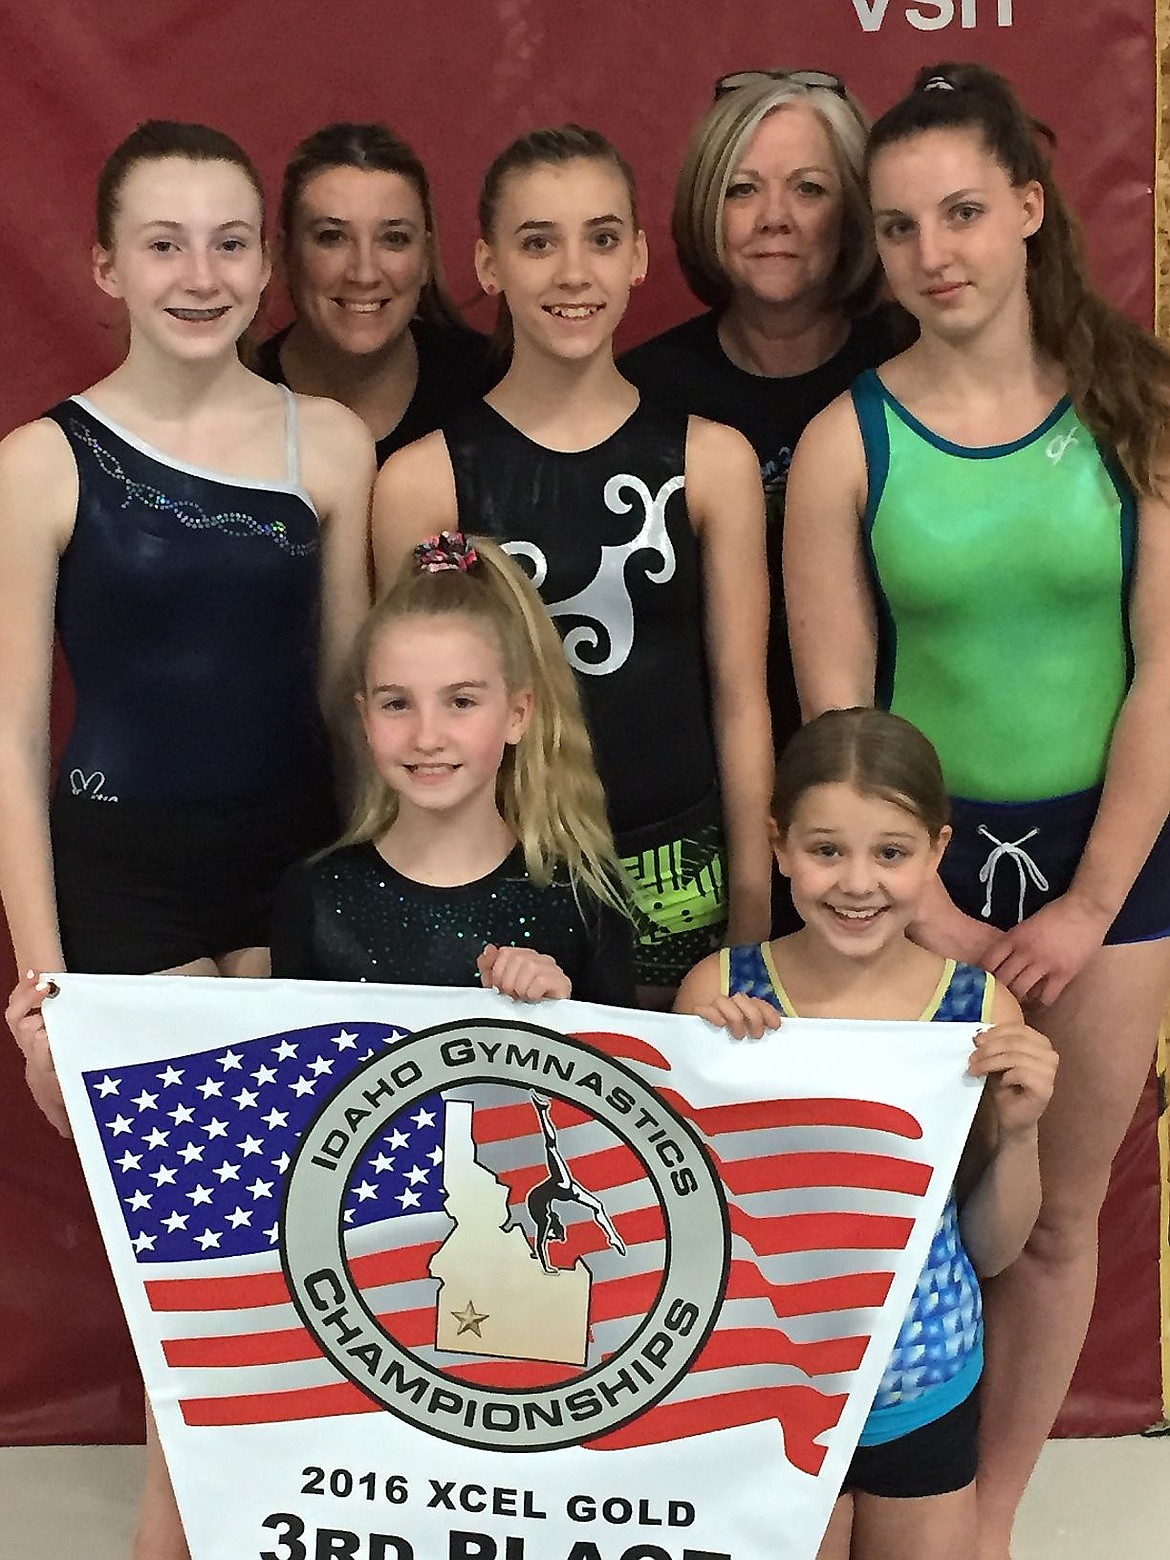 &lt;p&gt;Courtesy photo&lt;/p&gt;&lt;p&gt;The Technique Gymnastics Xcel Gold took third place team at the recent Idaho state meet in Boise. In the front row from left are Rylee Strobel and Riley Sheets; second row from left, Shelby Westray, Sydney McLean and Mallory Okon; and back row from left, coaches Tammy McLean and Mary Dorsey.&lt;/p&gt;